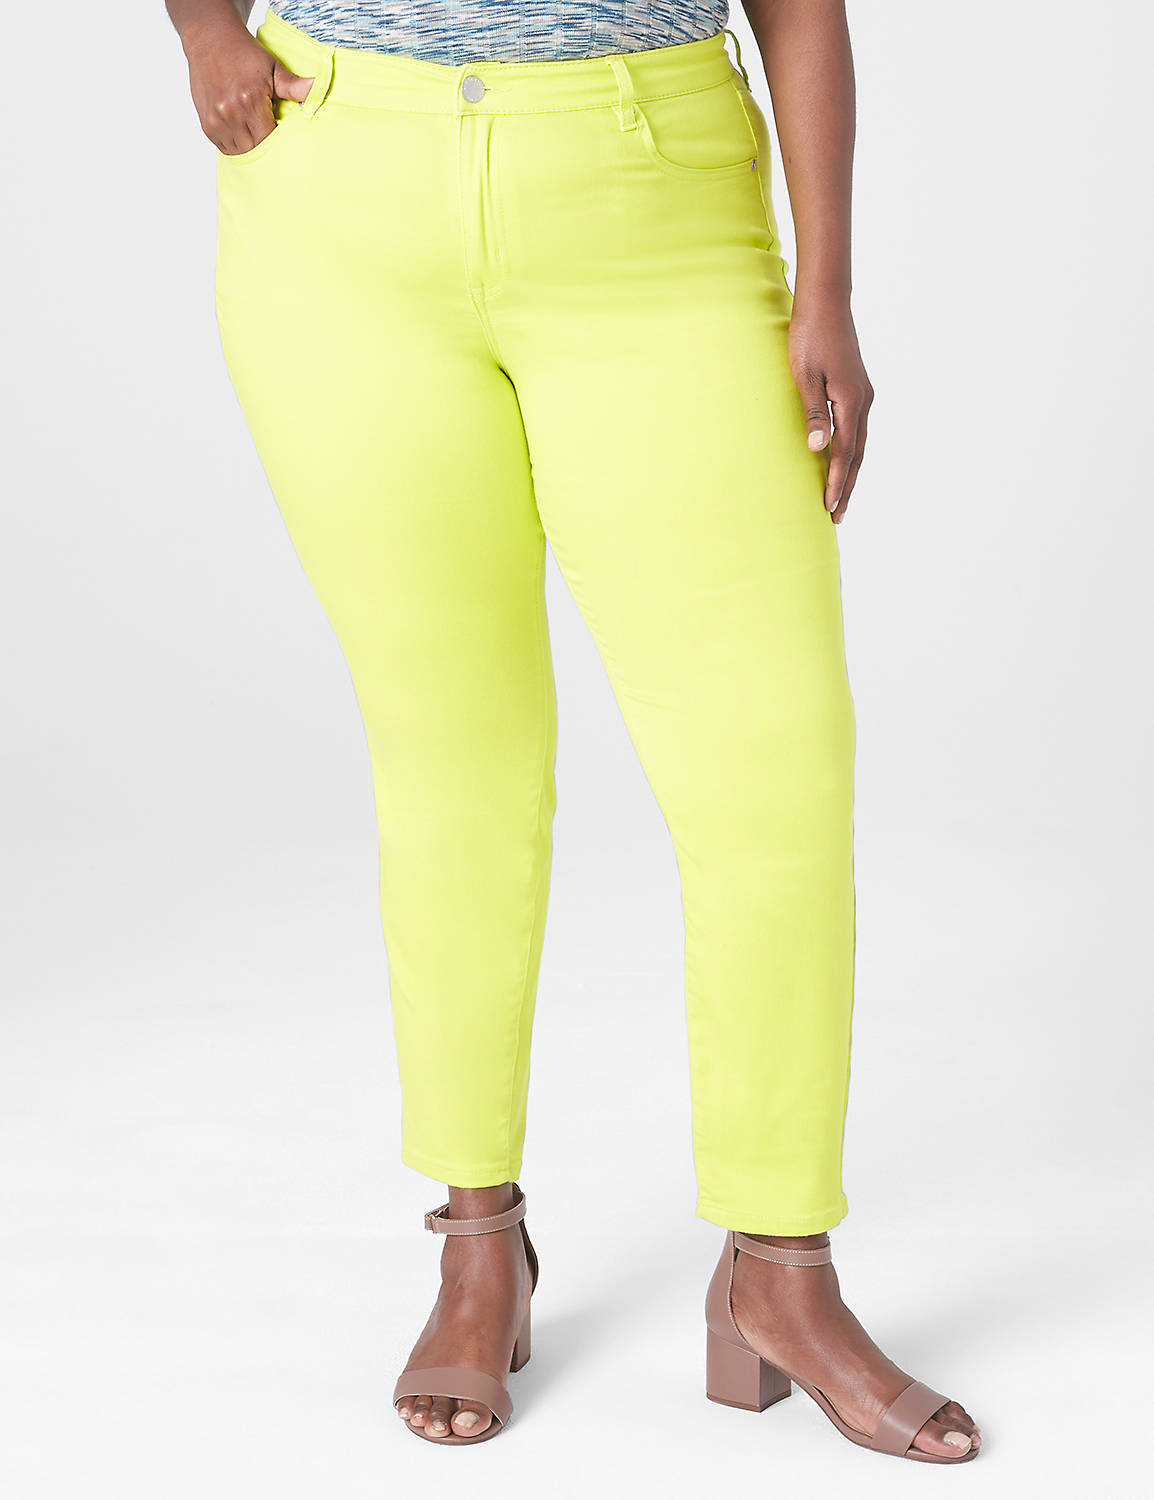 Curvy Fit Sateen Skinny 1127993 Product Image 3